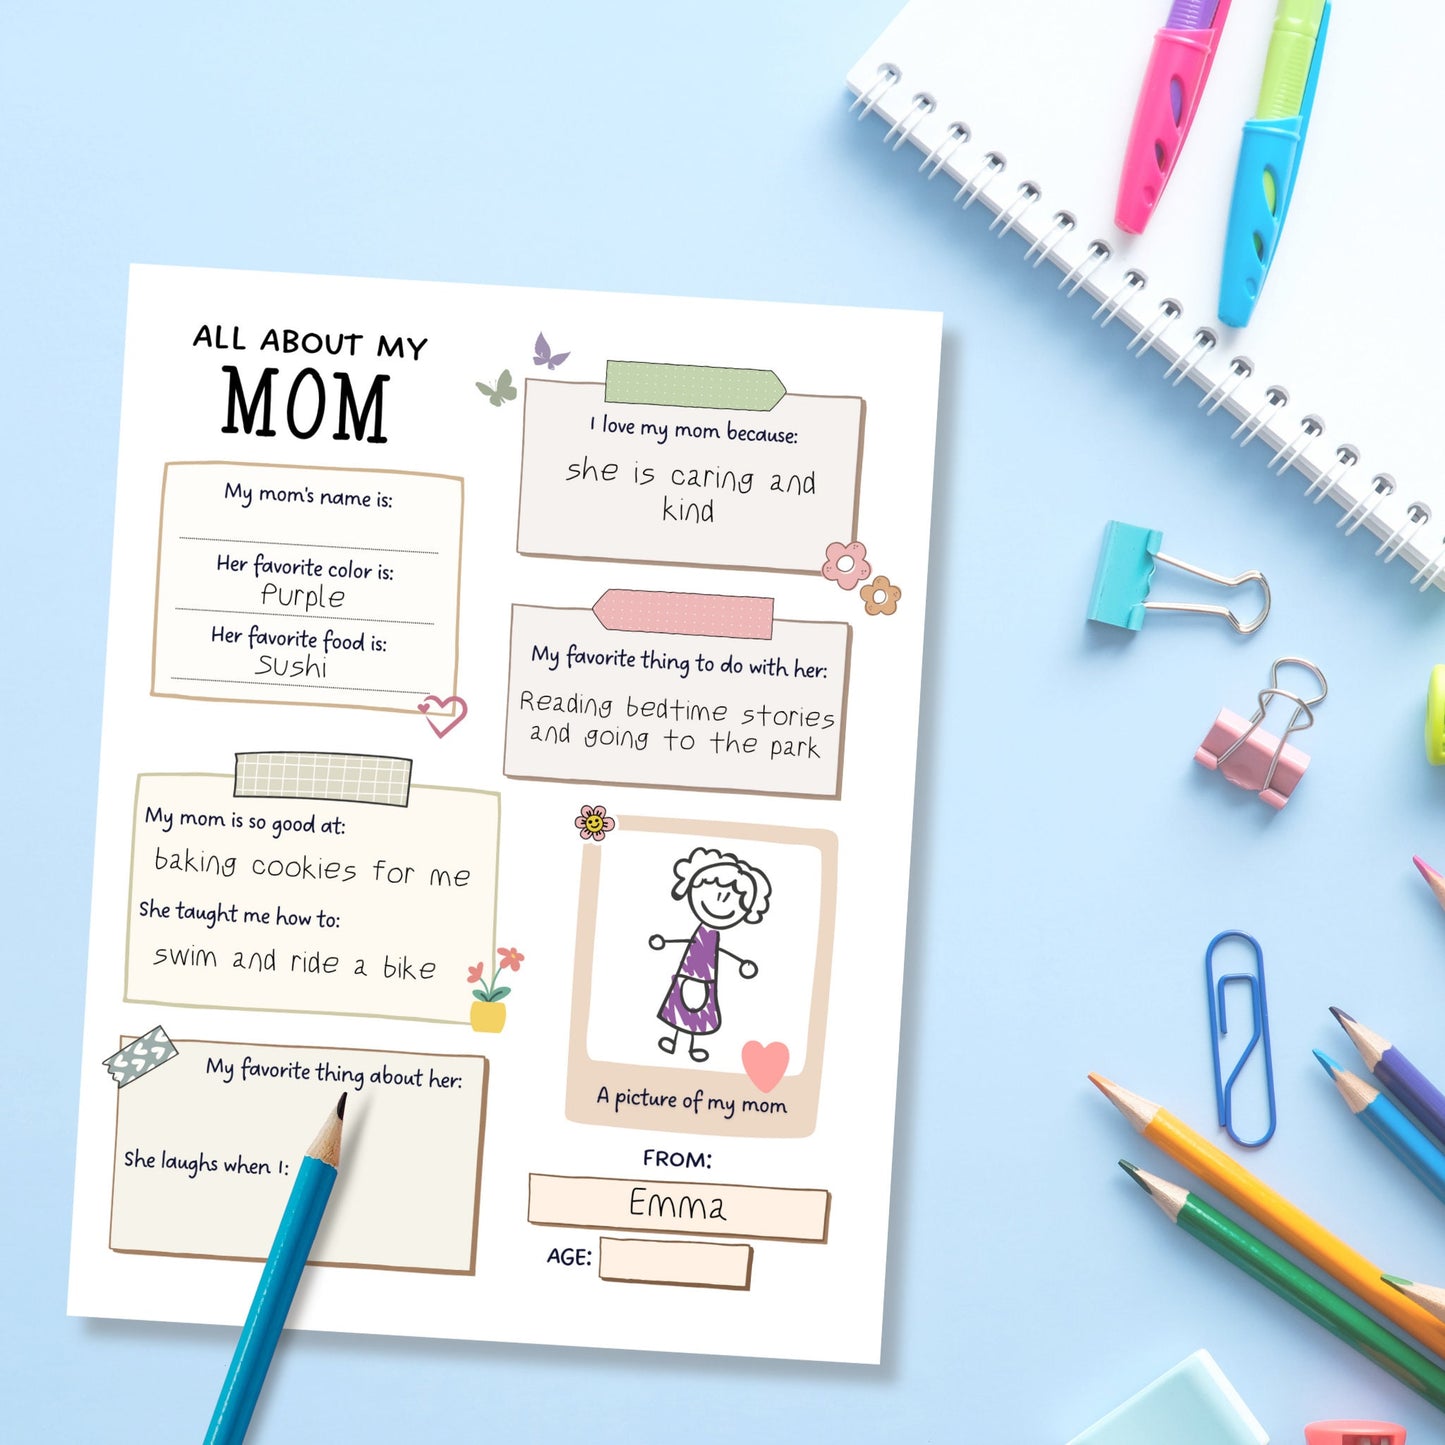 All About My Mom Survey Printable, Mothers Day Questionnaire, Mothers Day Gift Ideas For Preschool Kids, Personalized Keepsake Gift For Mom